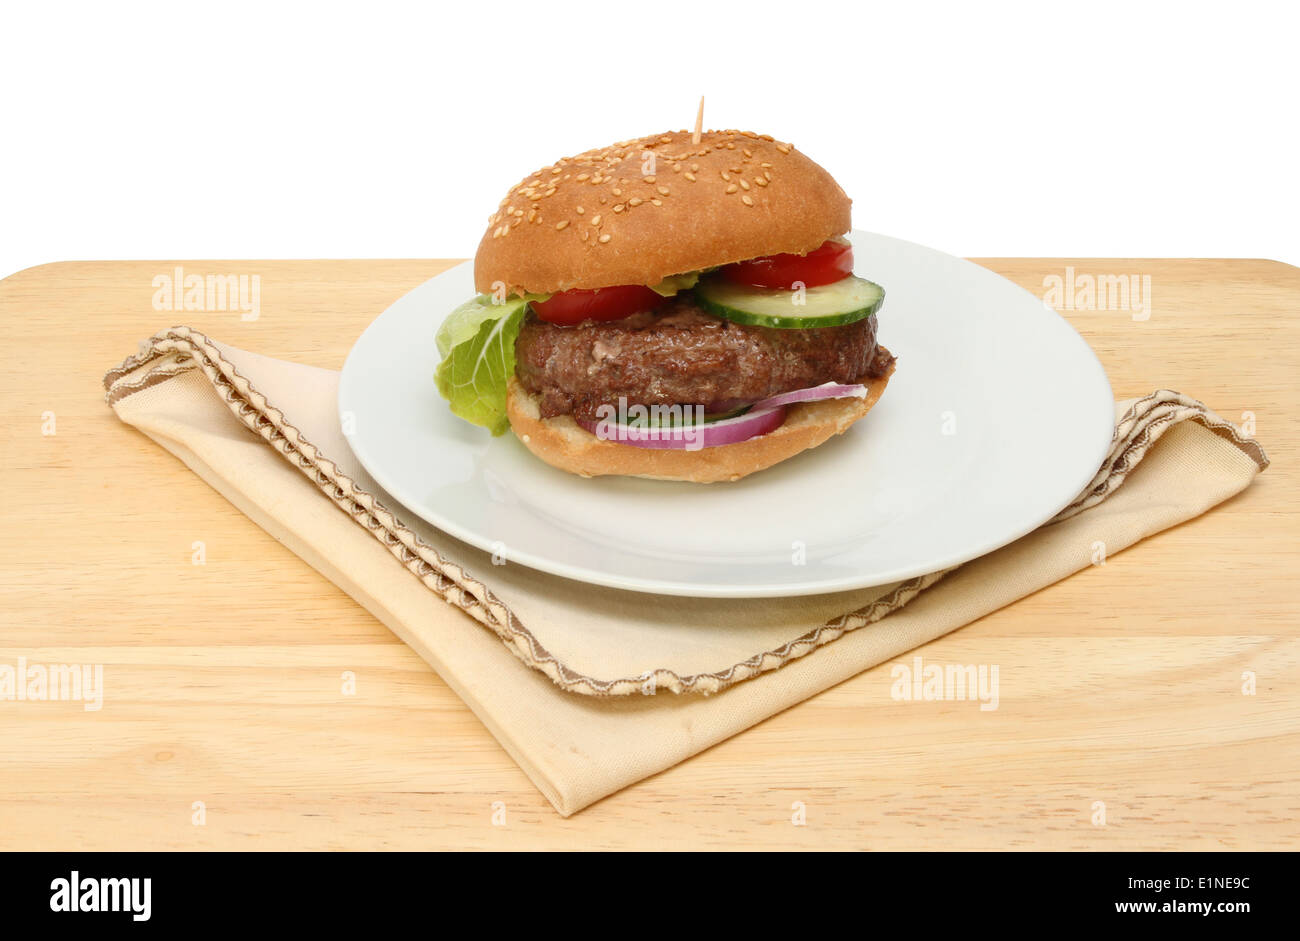 Beef burger on a plate with a serviette on a wooden table Stock Photo